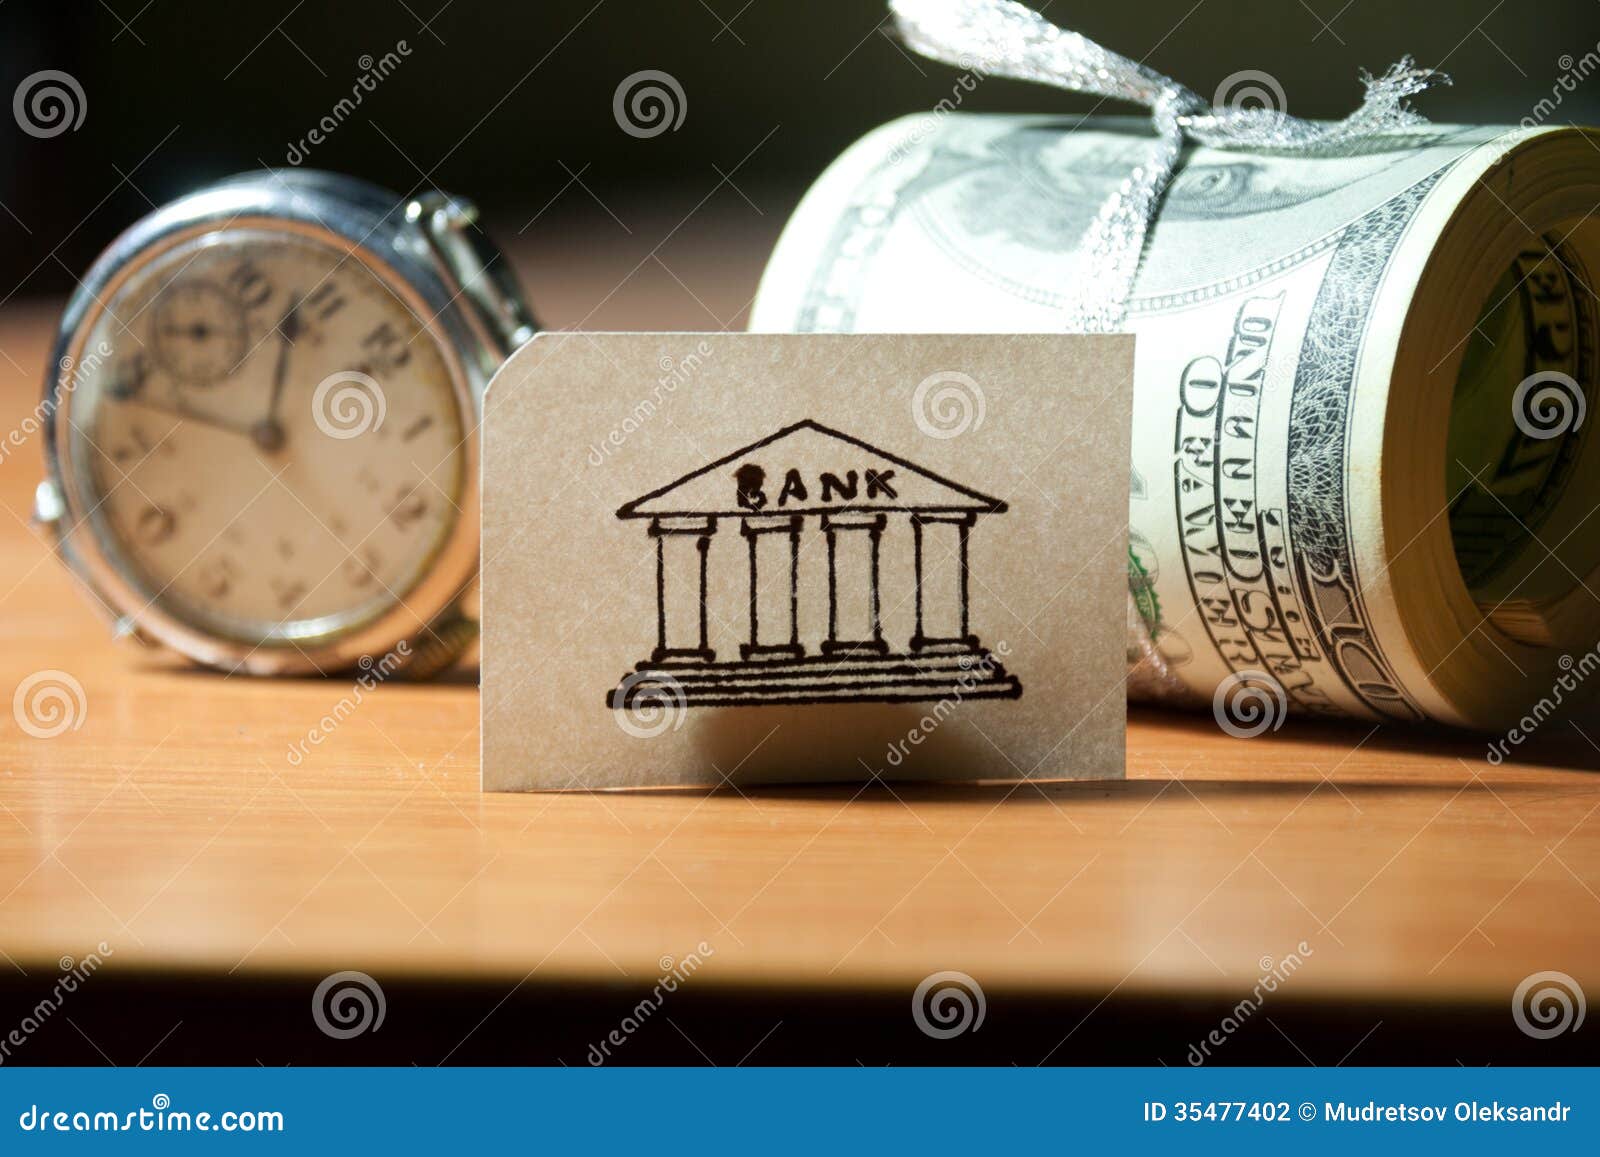 Time, money, bank stock photo. Image of equity, assets 35477402